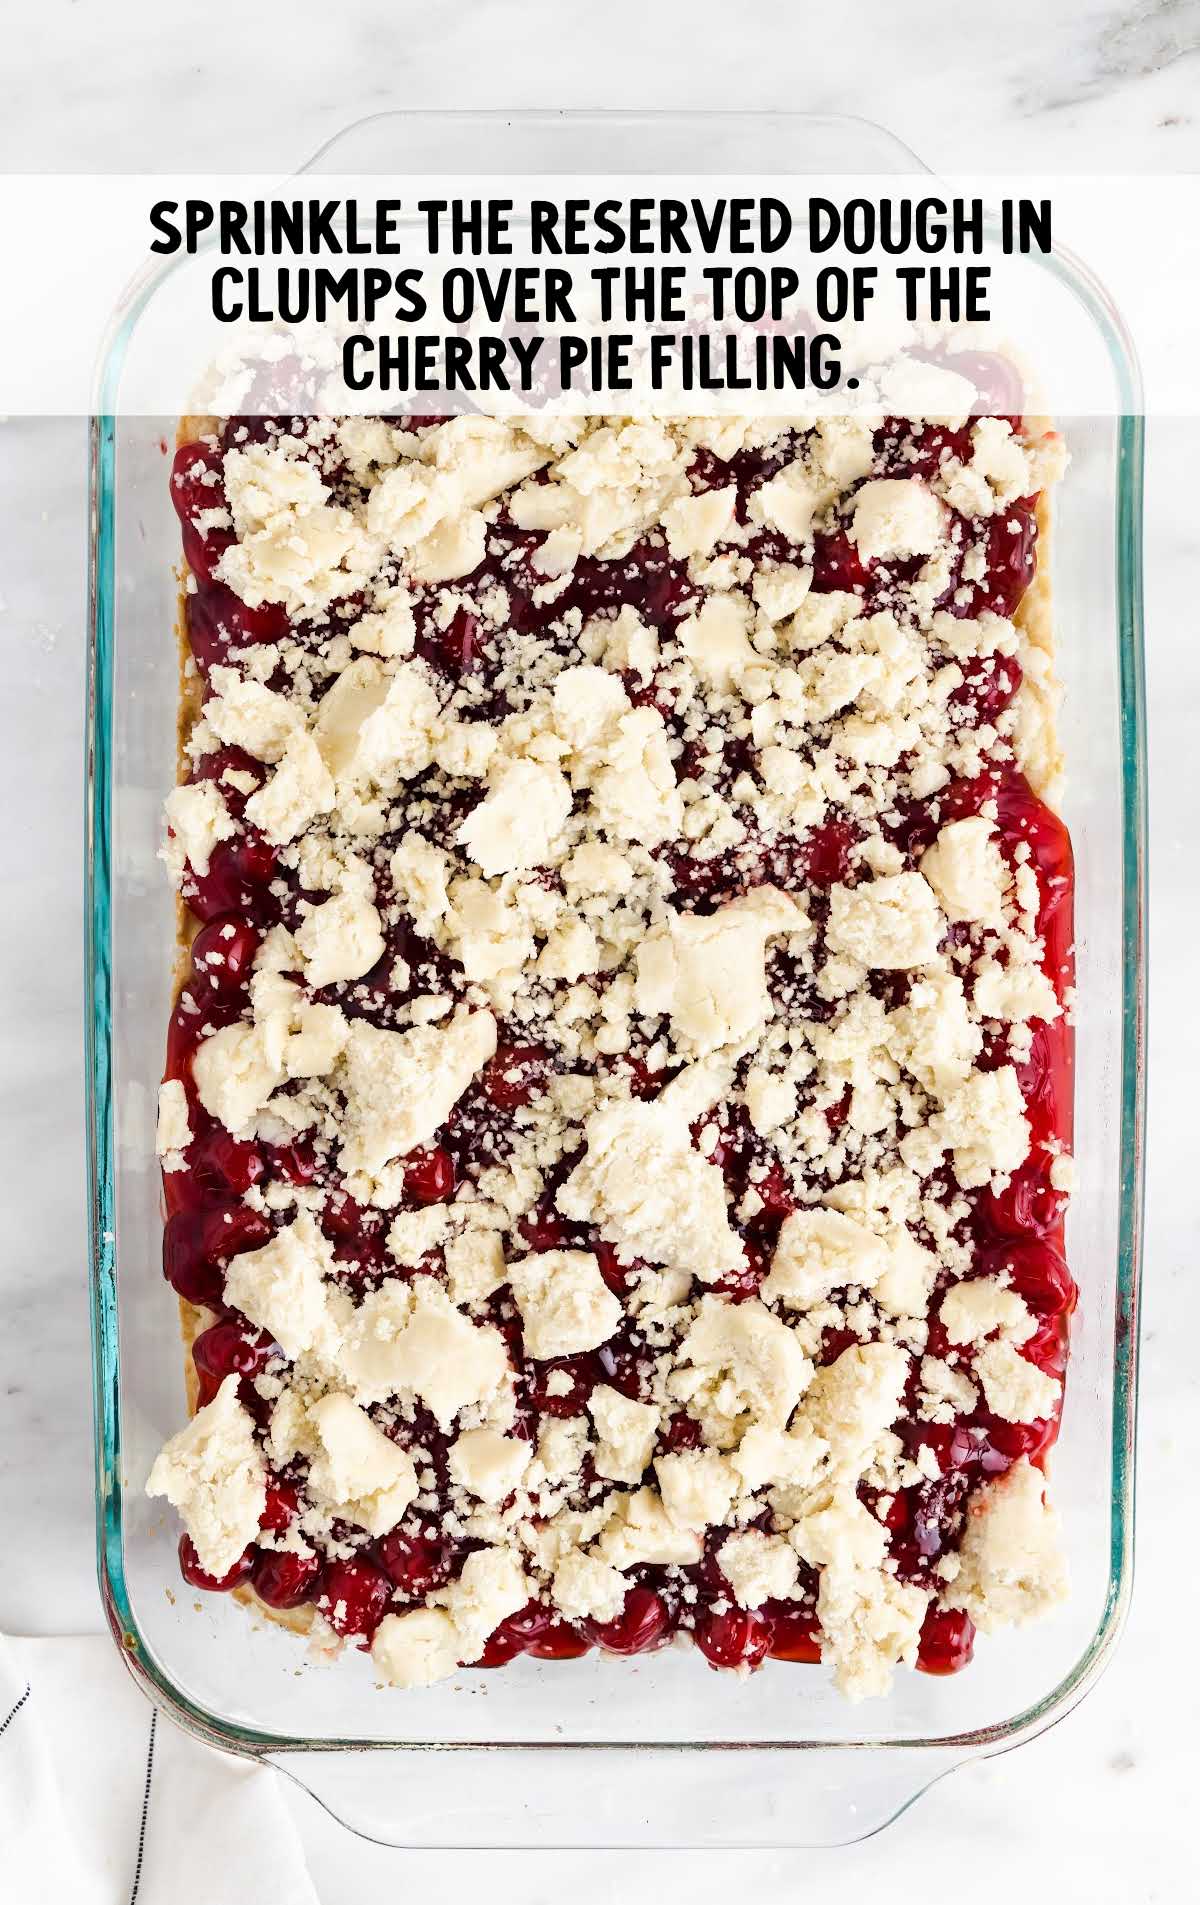 reserved dough sprinkled on top of the cherry pie filling